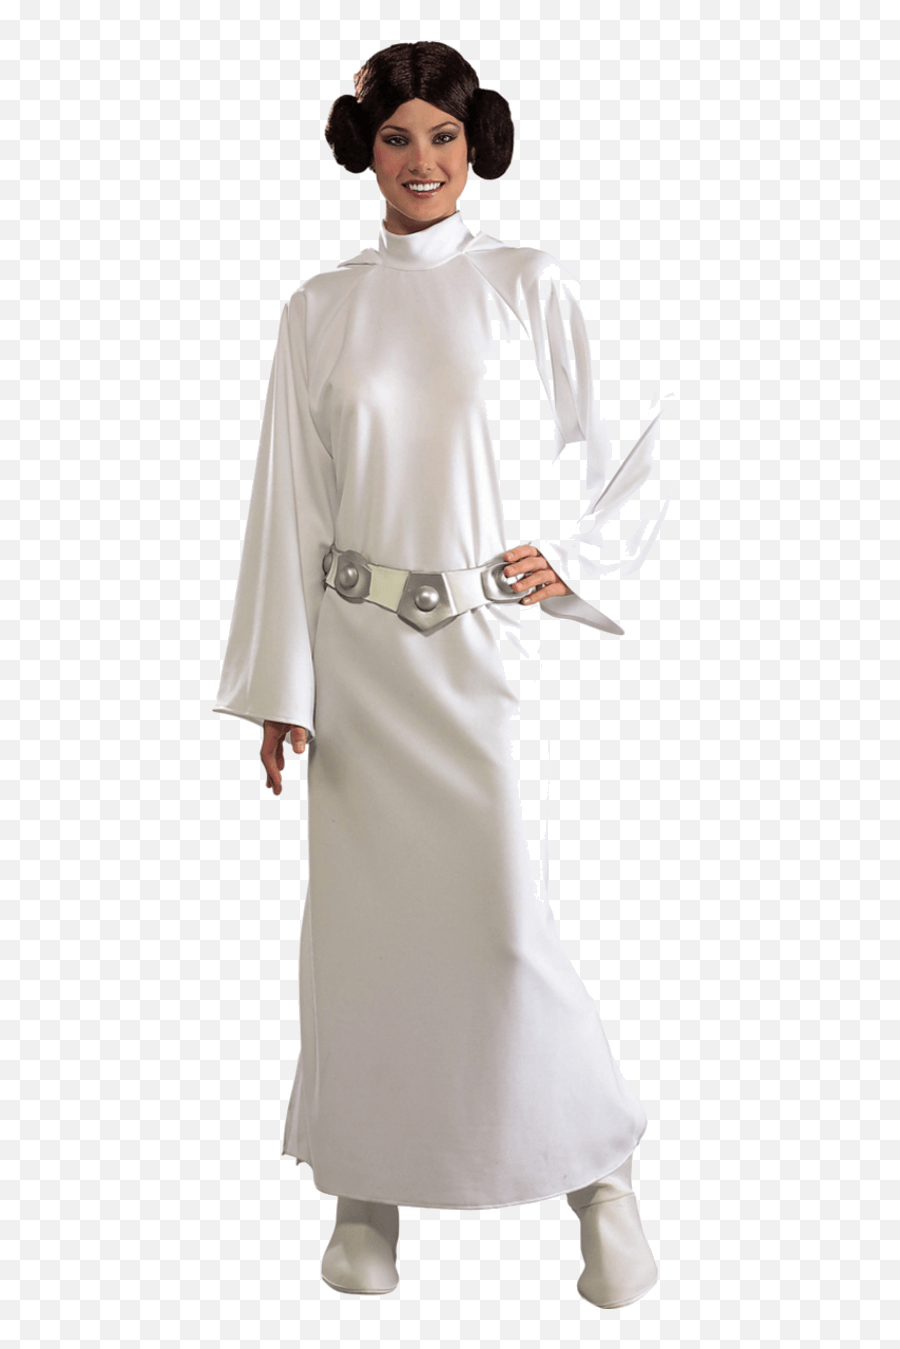 Star Wars Princess Leia Png Picture - Star Wars Womens Costume,Leia Png